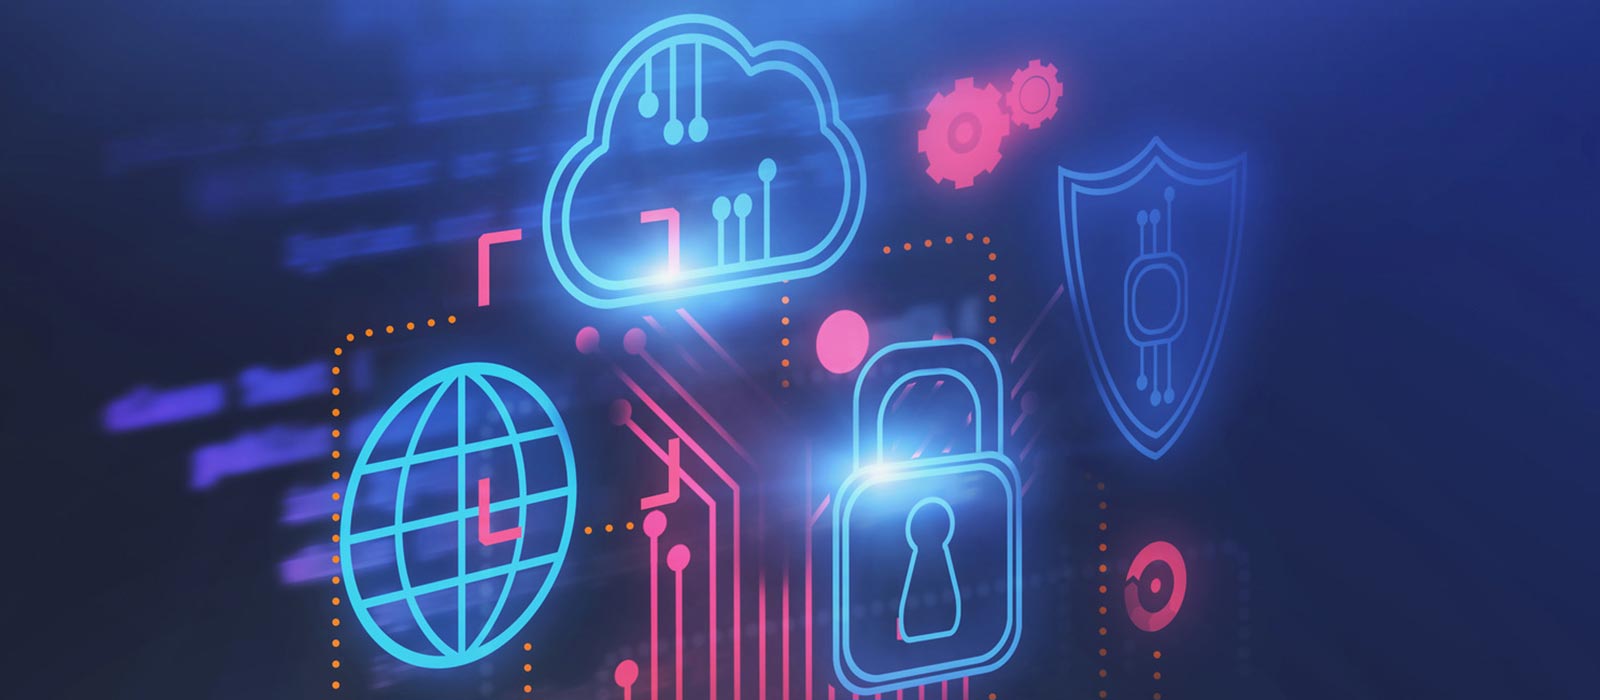 Take charge of multi-cloud security and compliance